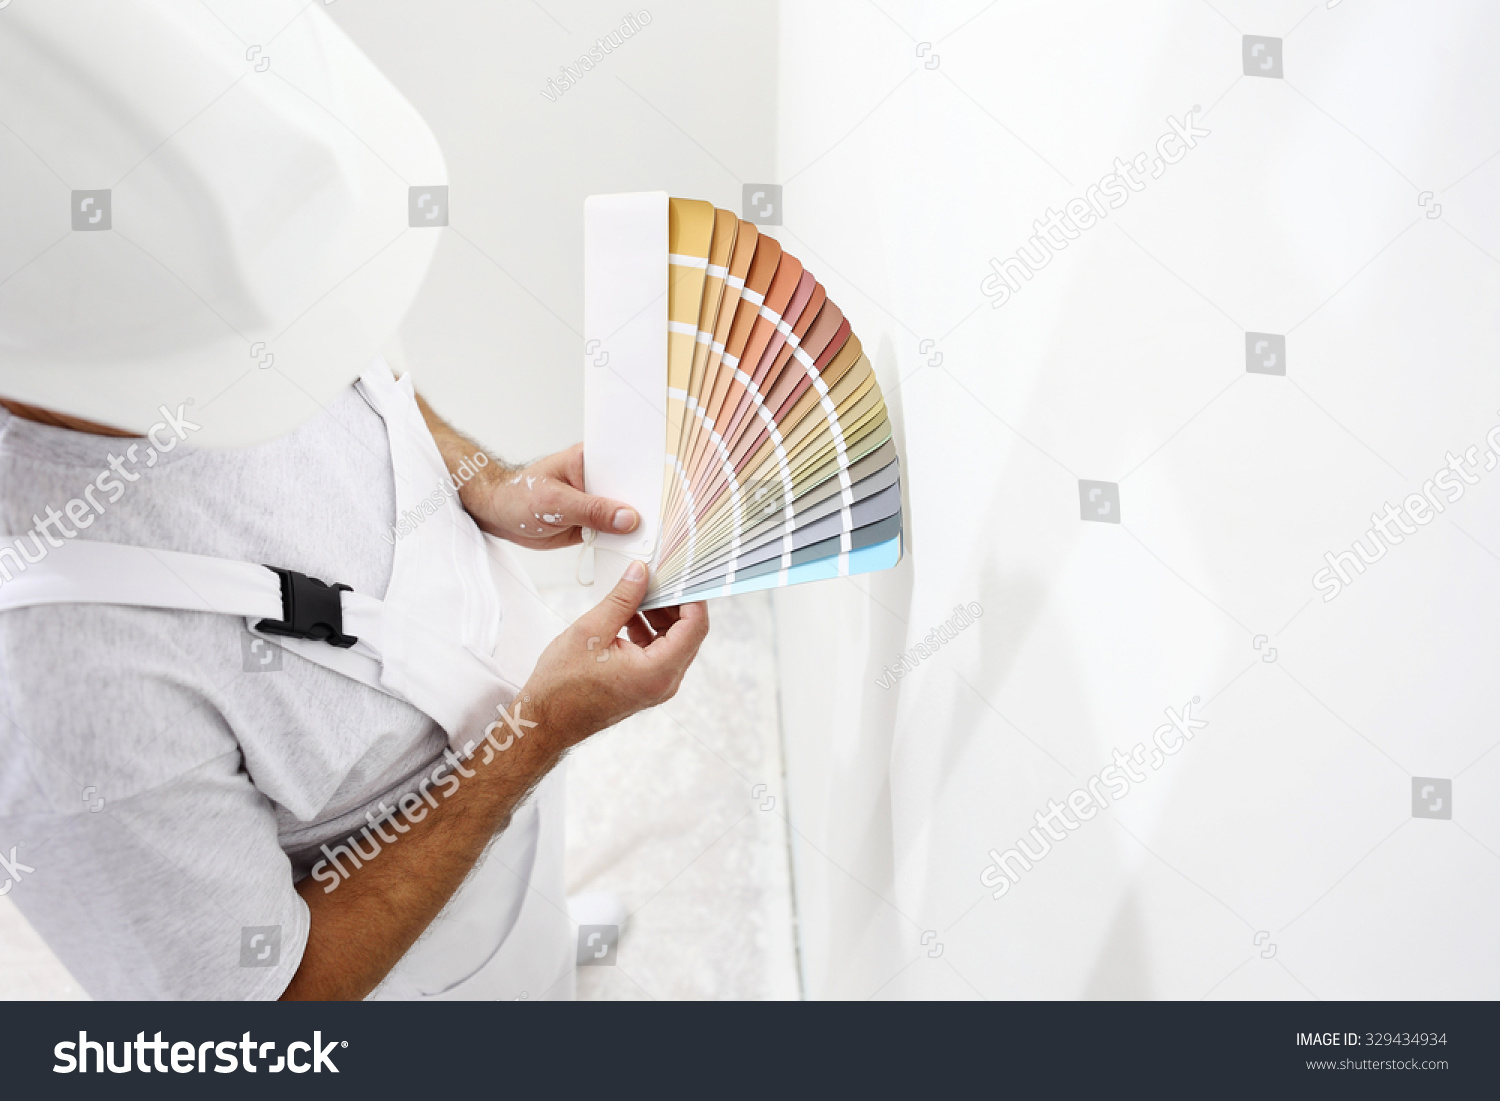 painter man with color swatches in your hand  #329434934